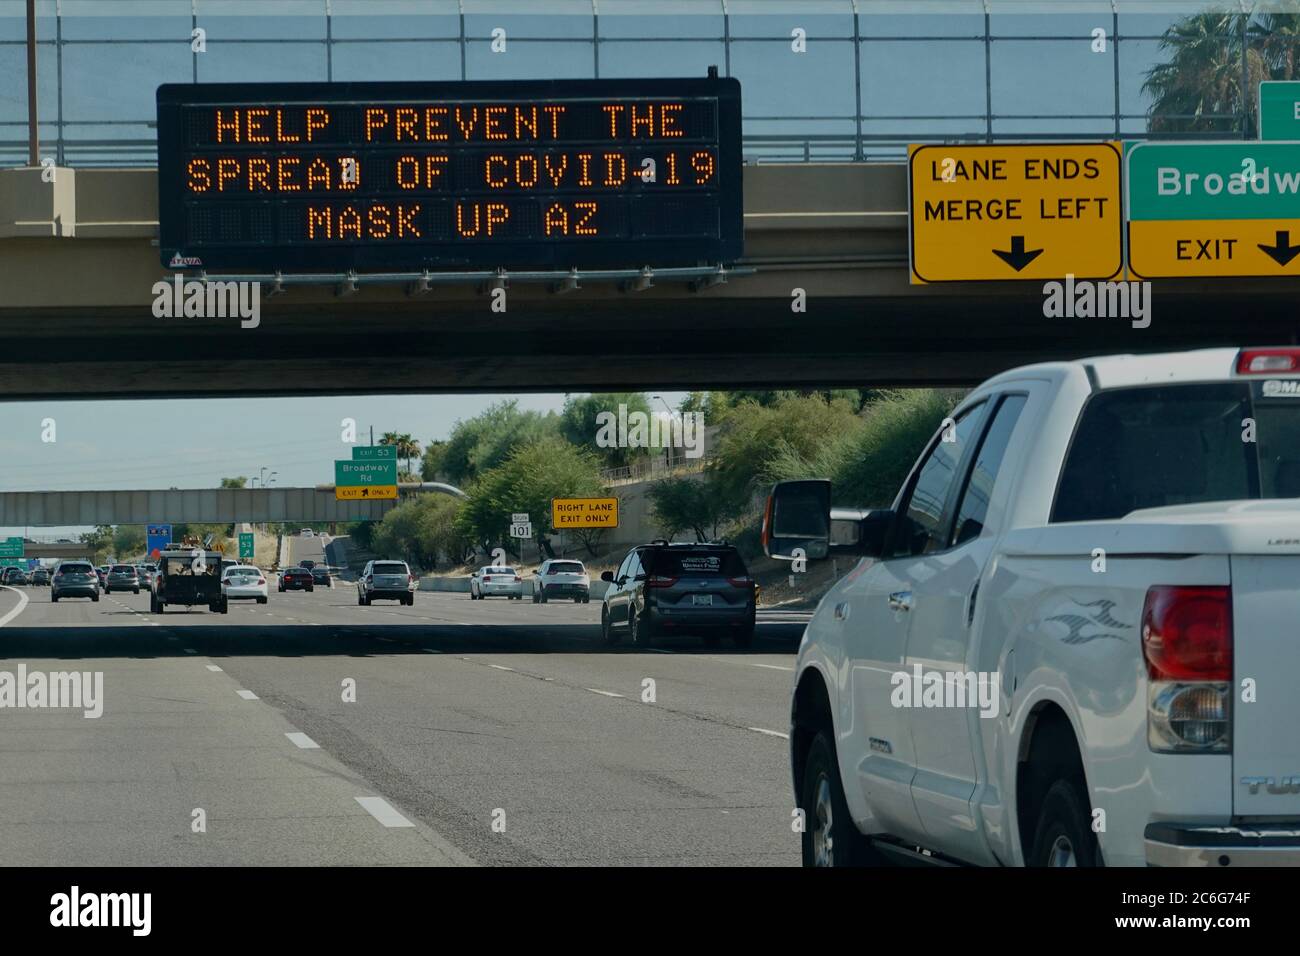 Street signs on the highway show awareness and warnings for the pandemic COVID-19. Stock Photo